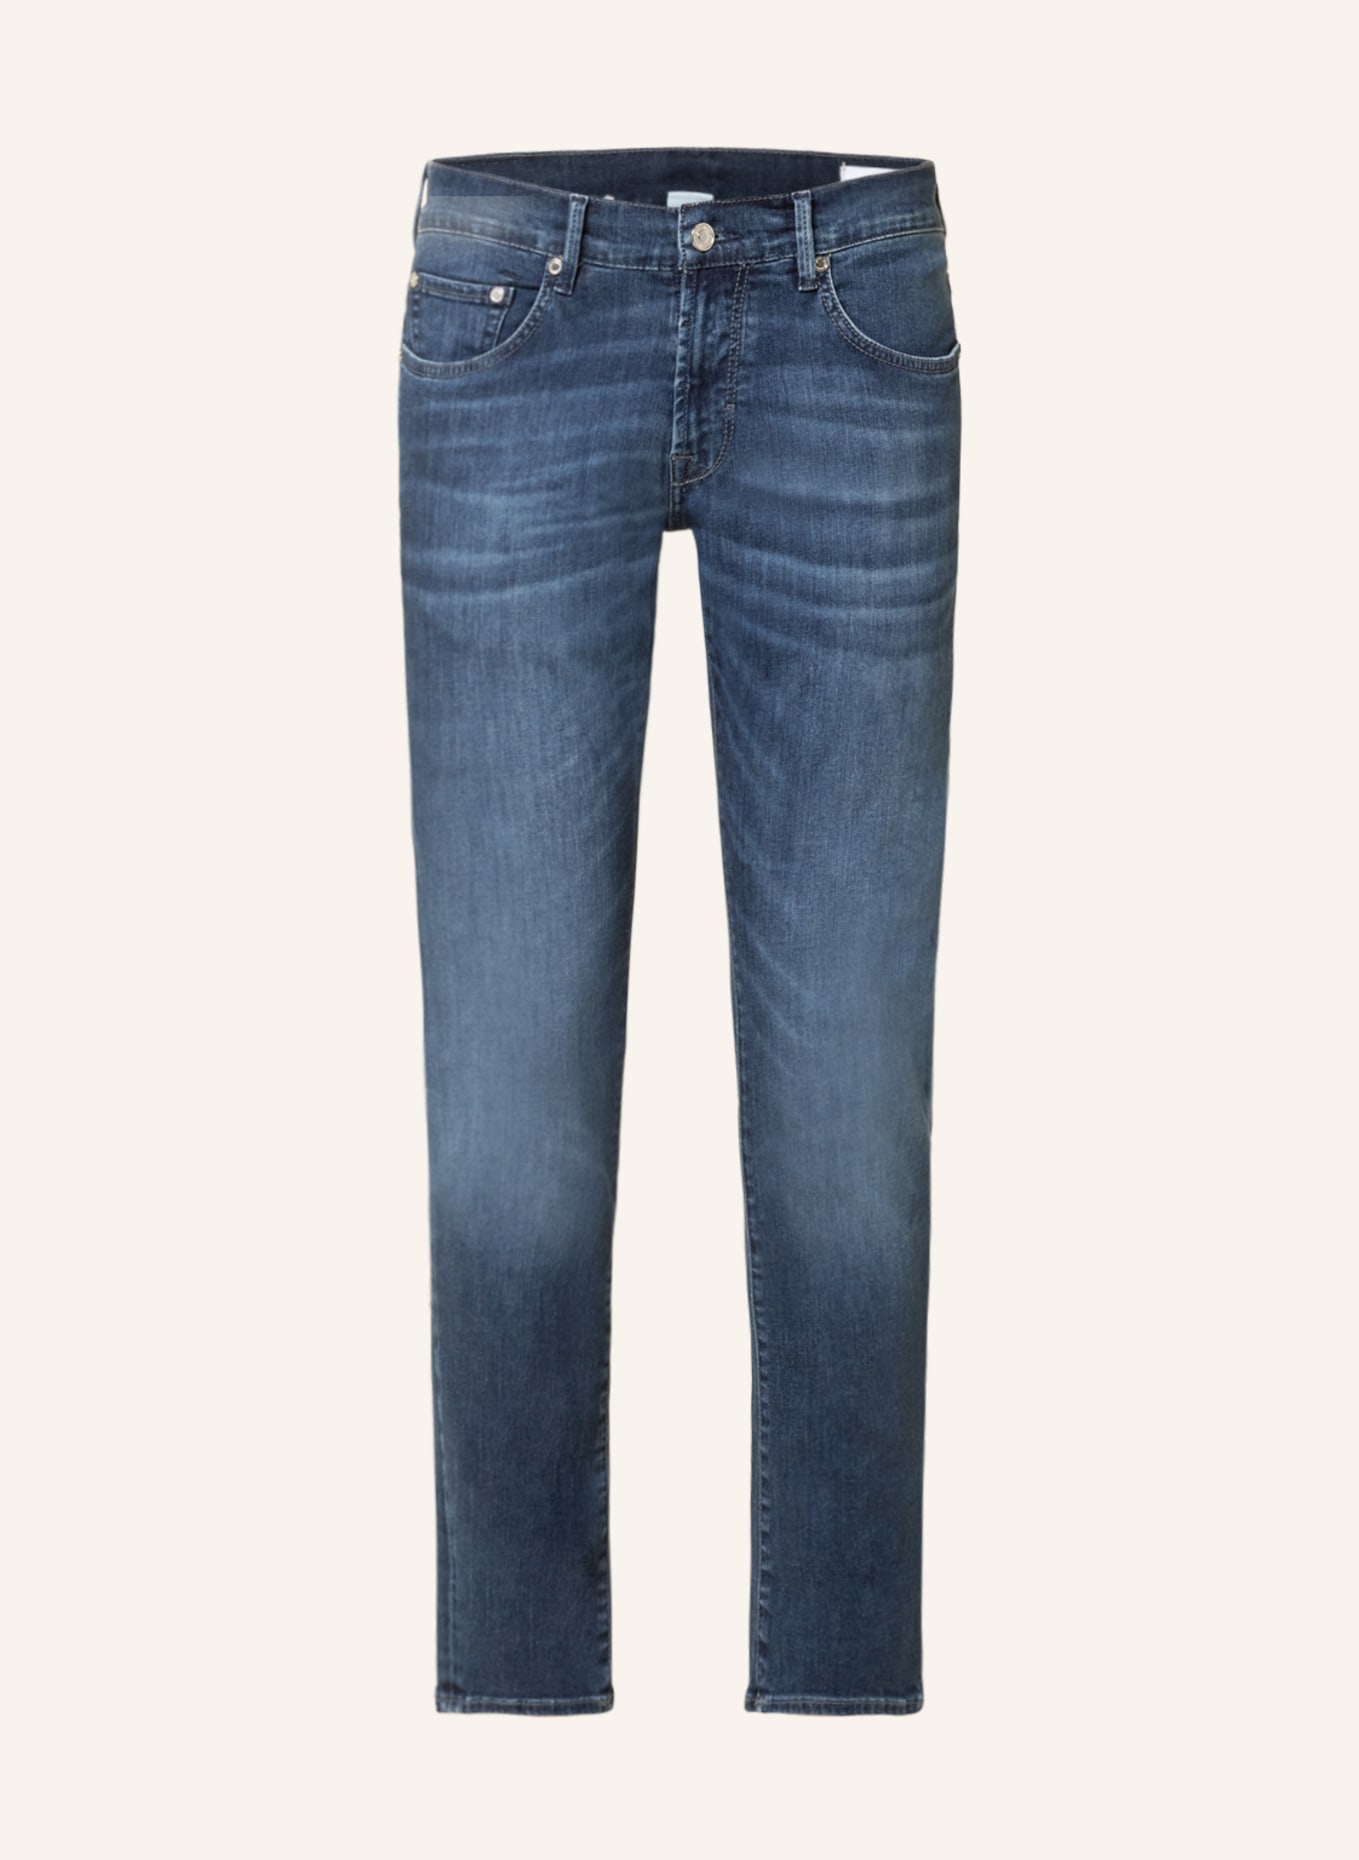 BALDESSARINI Jeans slim fit, Color: 6836 blue used buffies (Image 1)